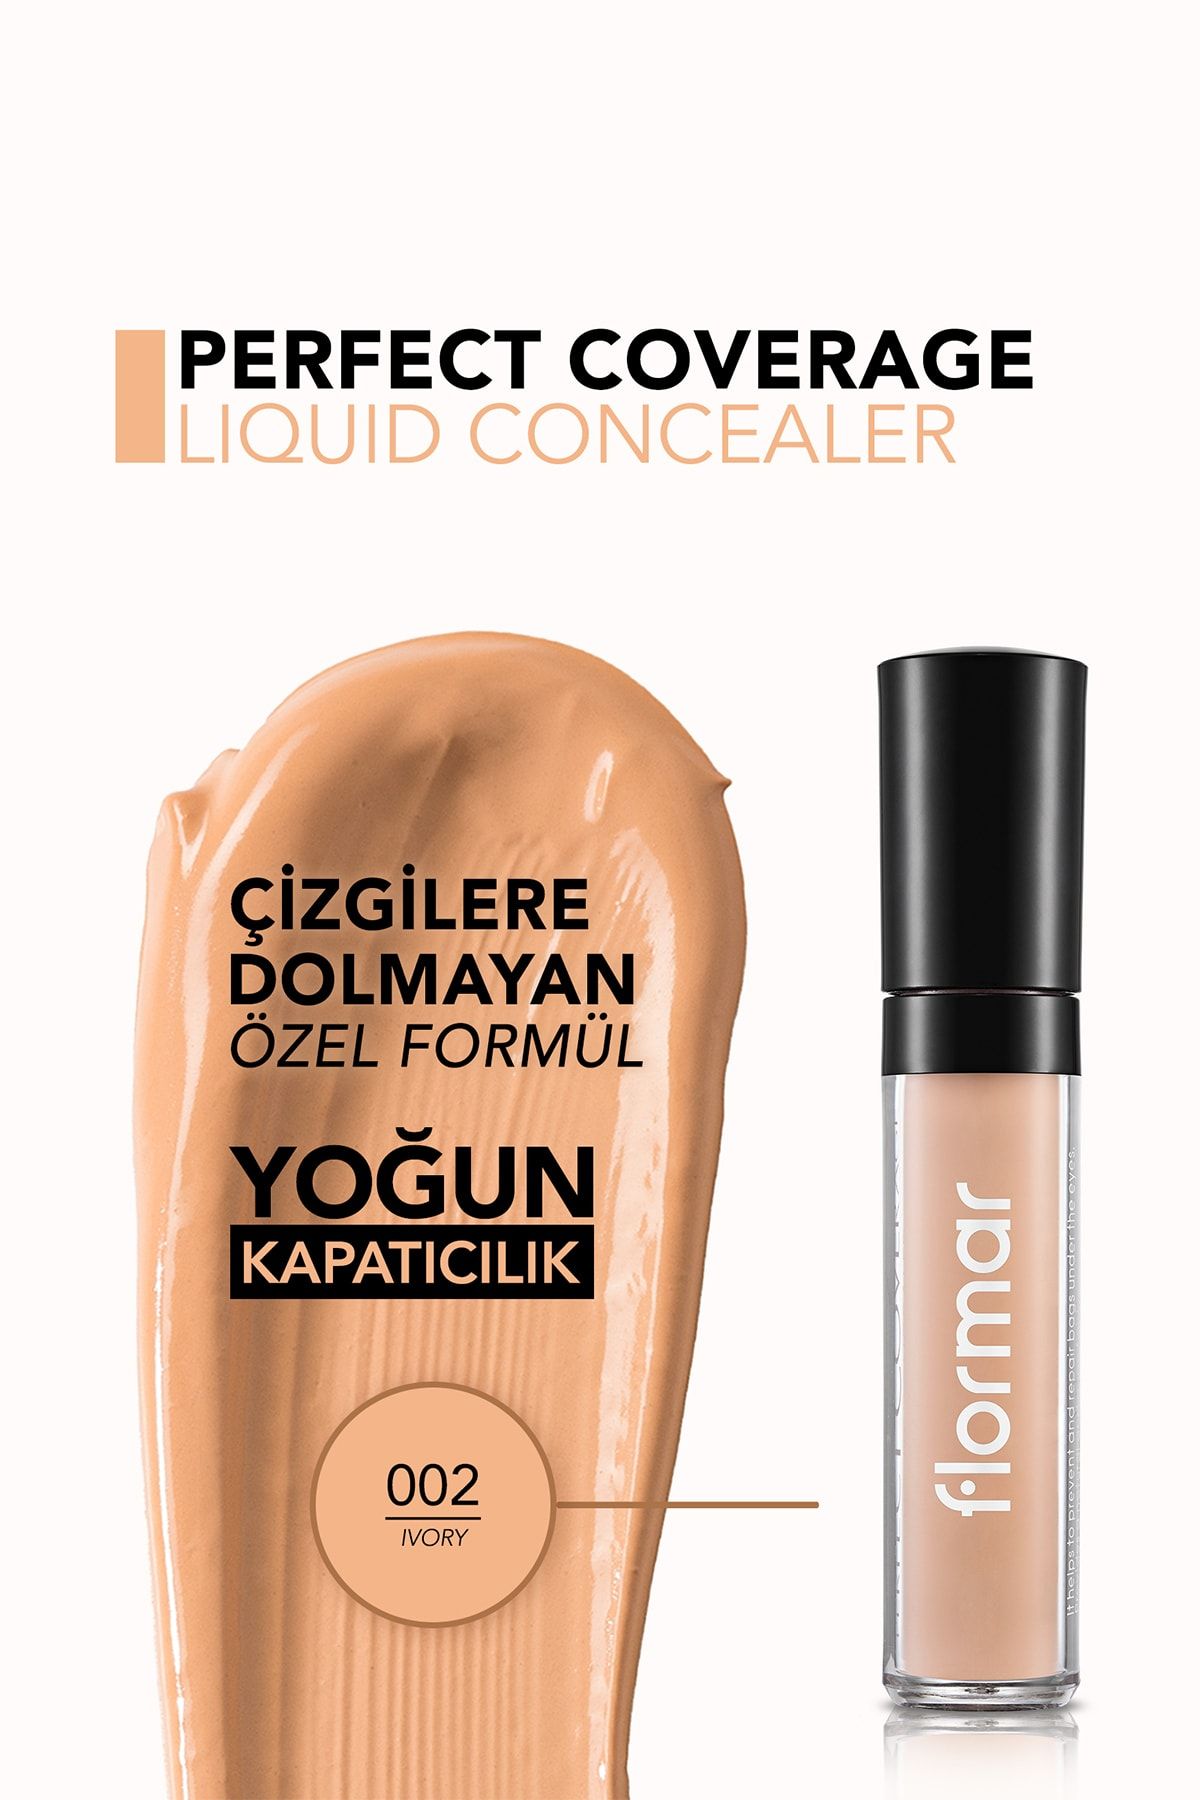 Flormar - Perfect Liquid Concealer promises you to cover